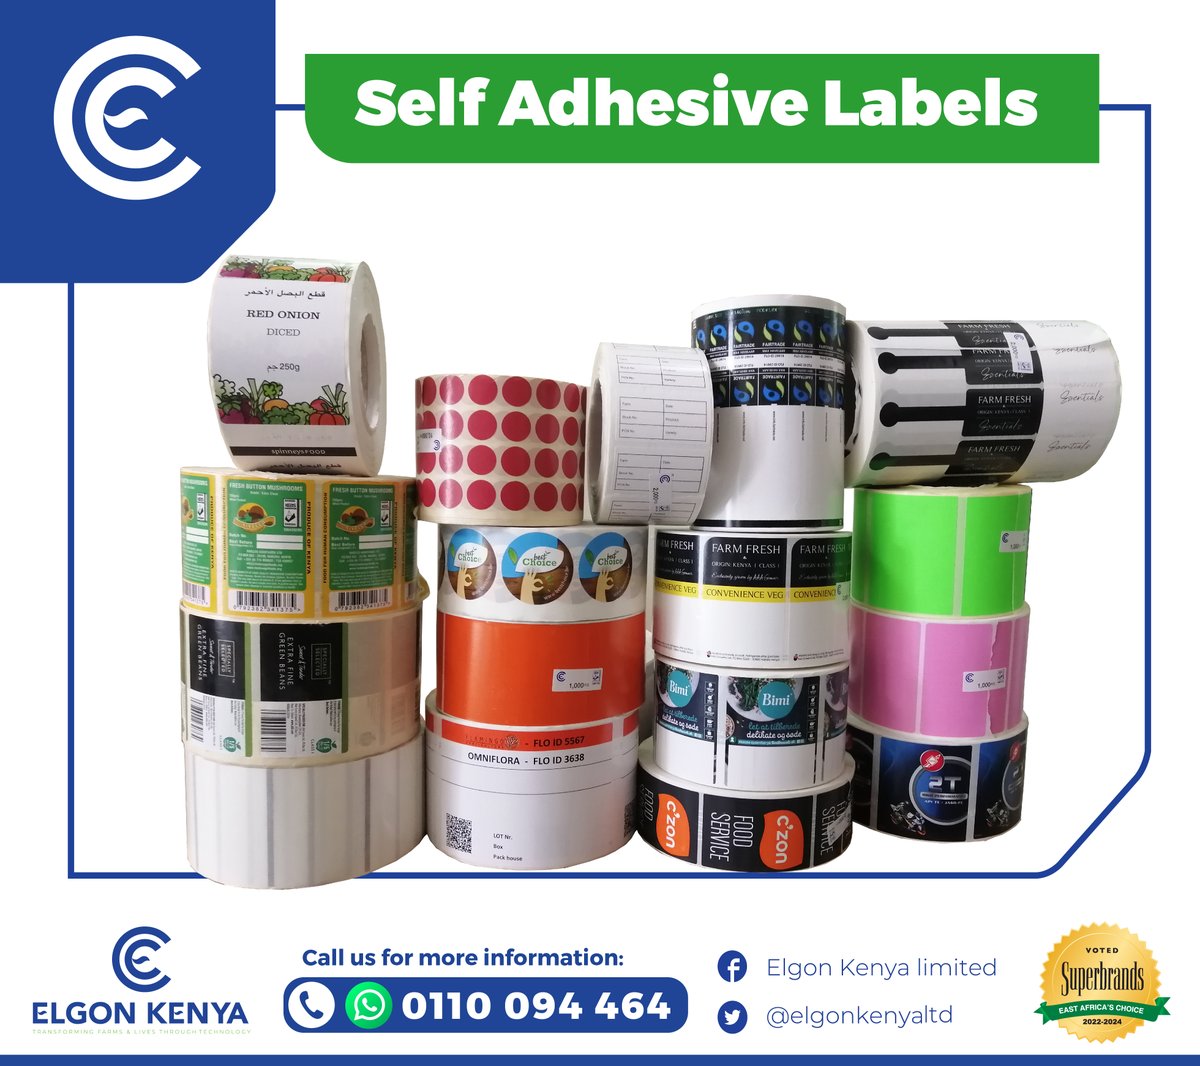 Labeling made easy! 

Self-adhesive labels stick securely to any surface, perfect for organizing at home or in the office. 

Choose from a variety of sizes and shapes to fit your needs. Try them today!
📞 0110 094 464

 #selfadhesivelabels #elgonkenya  #labelsticker #labels #KOT